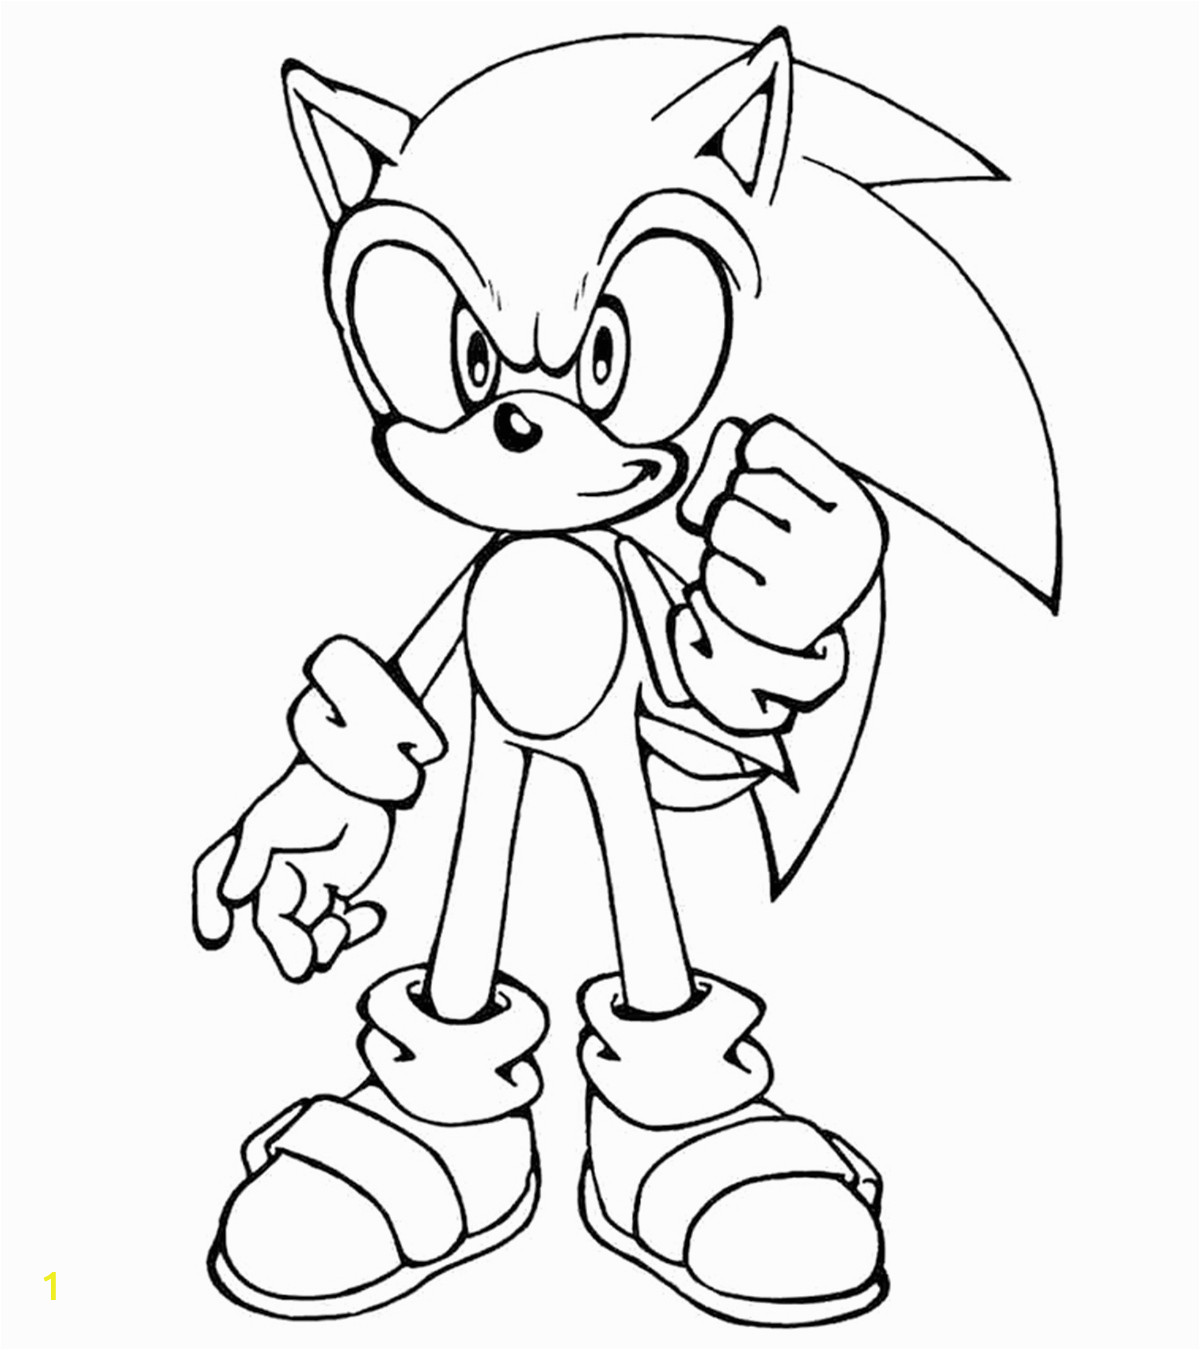 Sonic the Hedgehog Free Coloring Pages sonic the Hedgehog Coloring Pages Tails